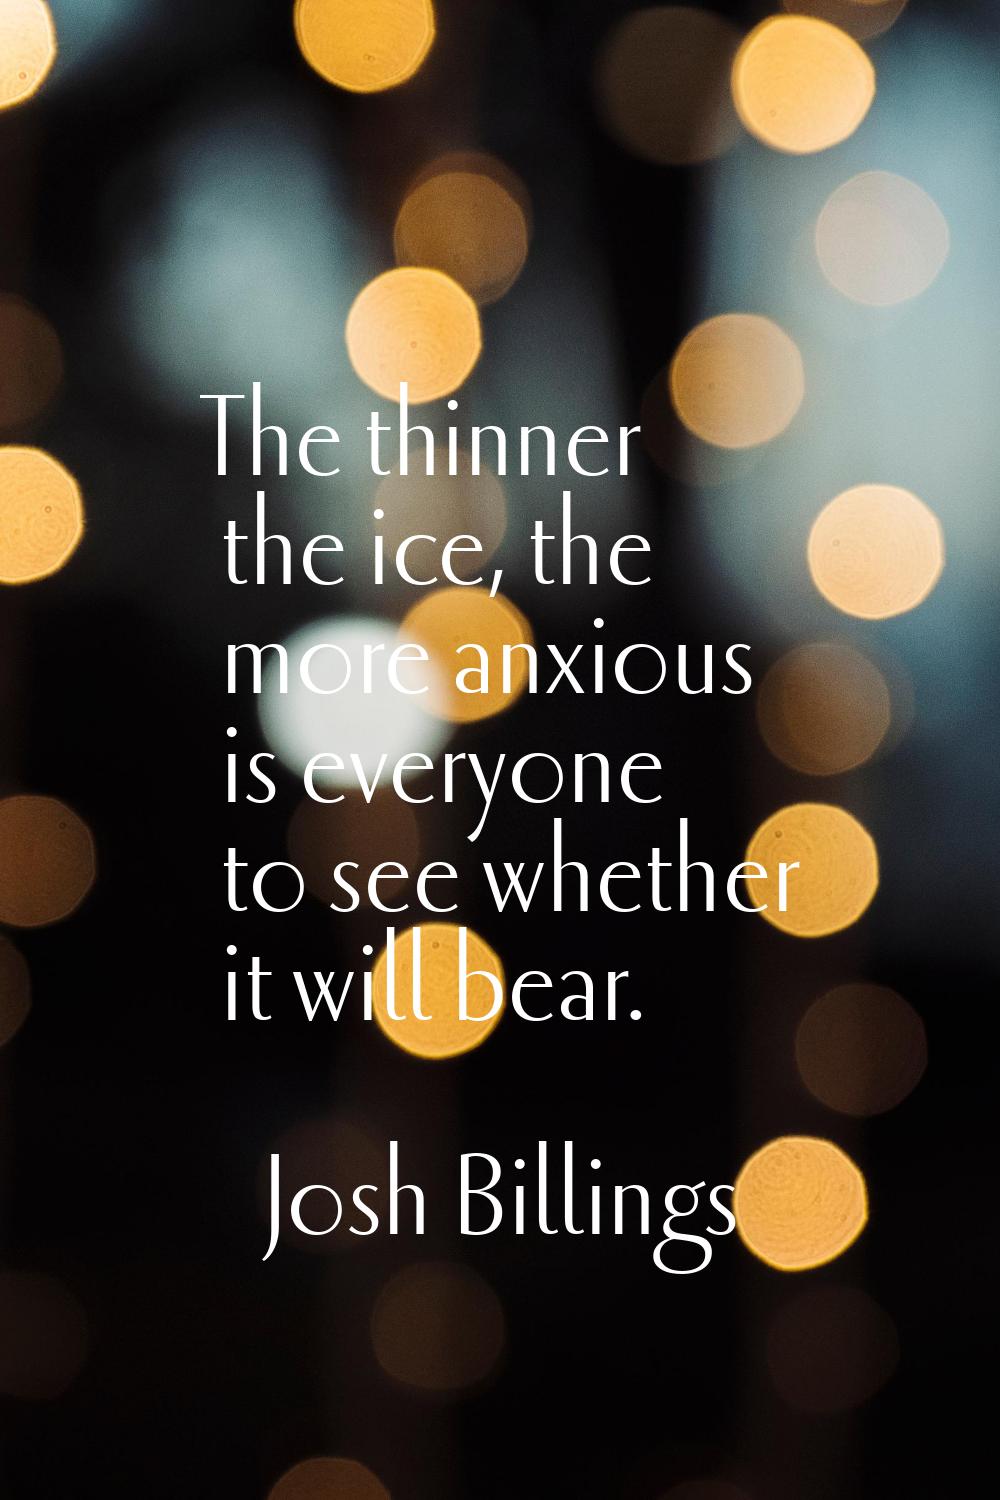 The thinner the ice, the more anxious is everyone to see whether it will bear.